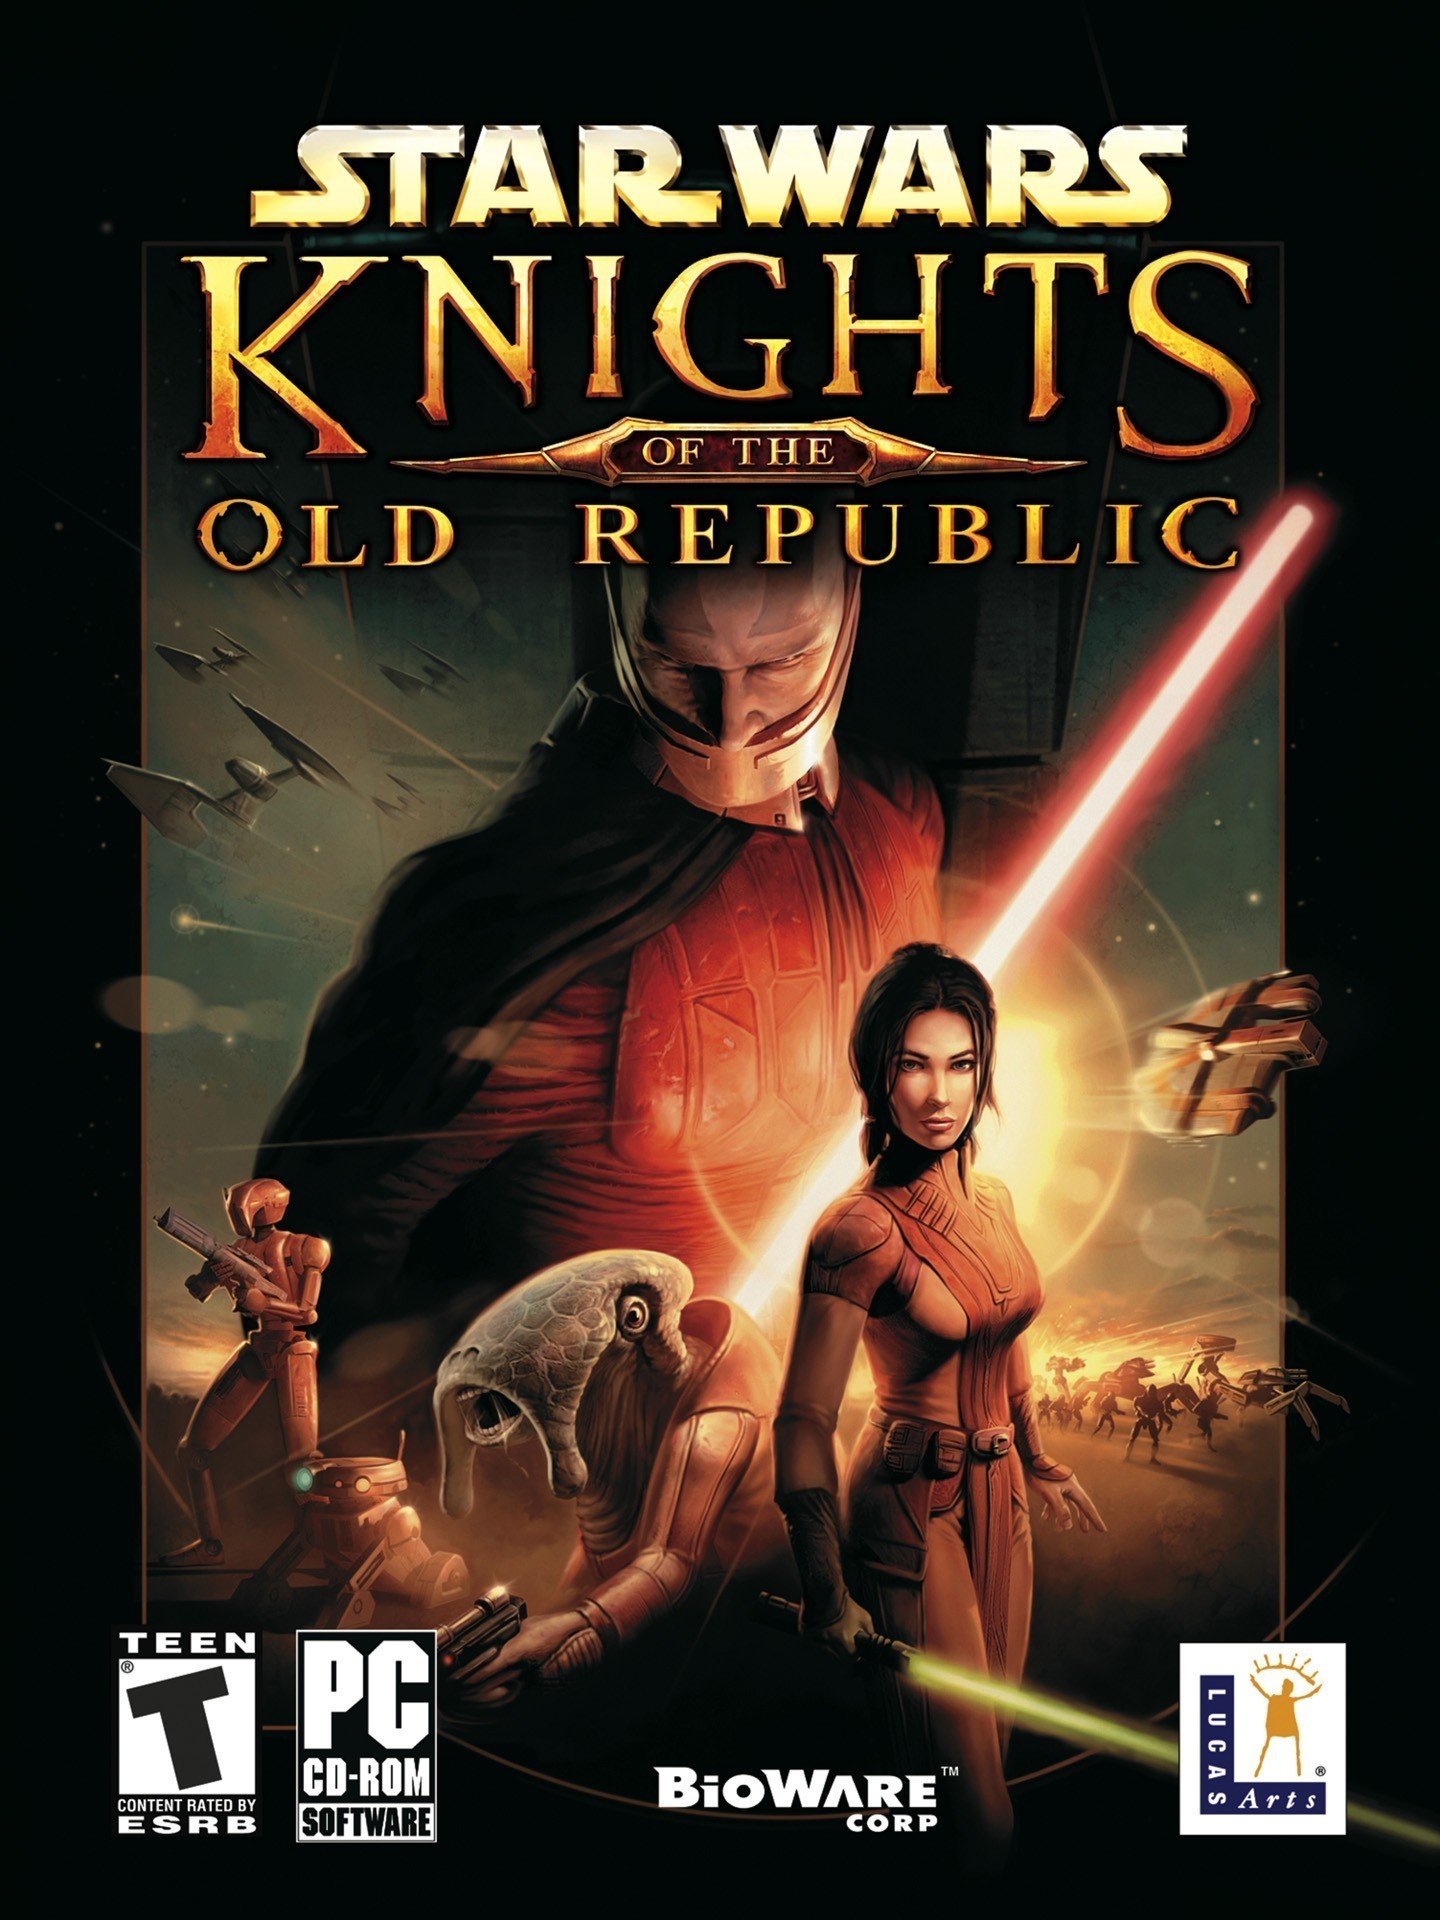 Knights_of_the_old_republic_star_wars